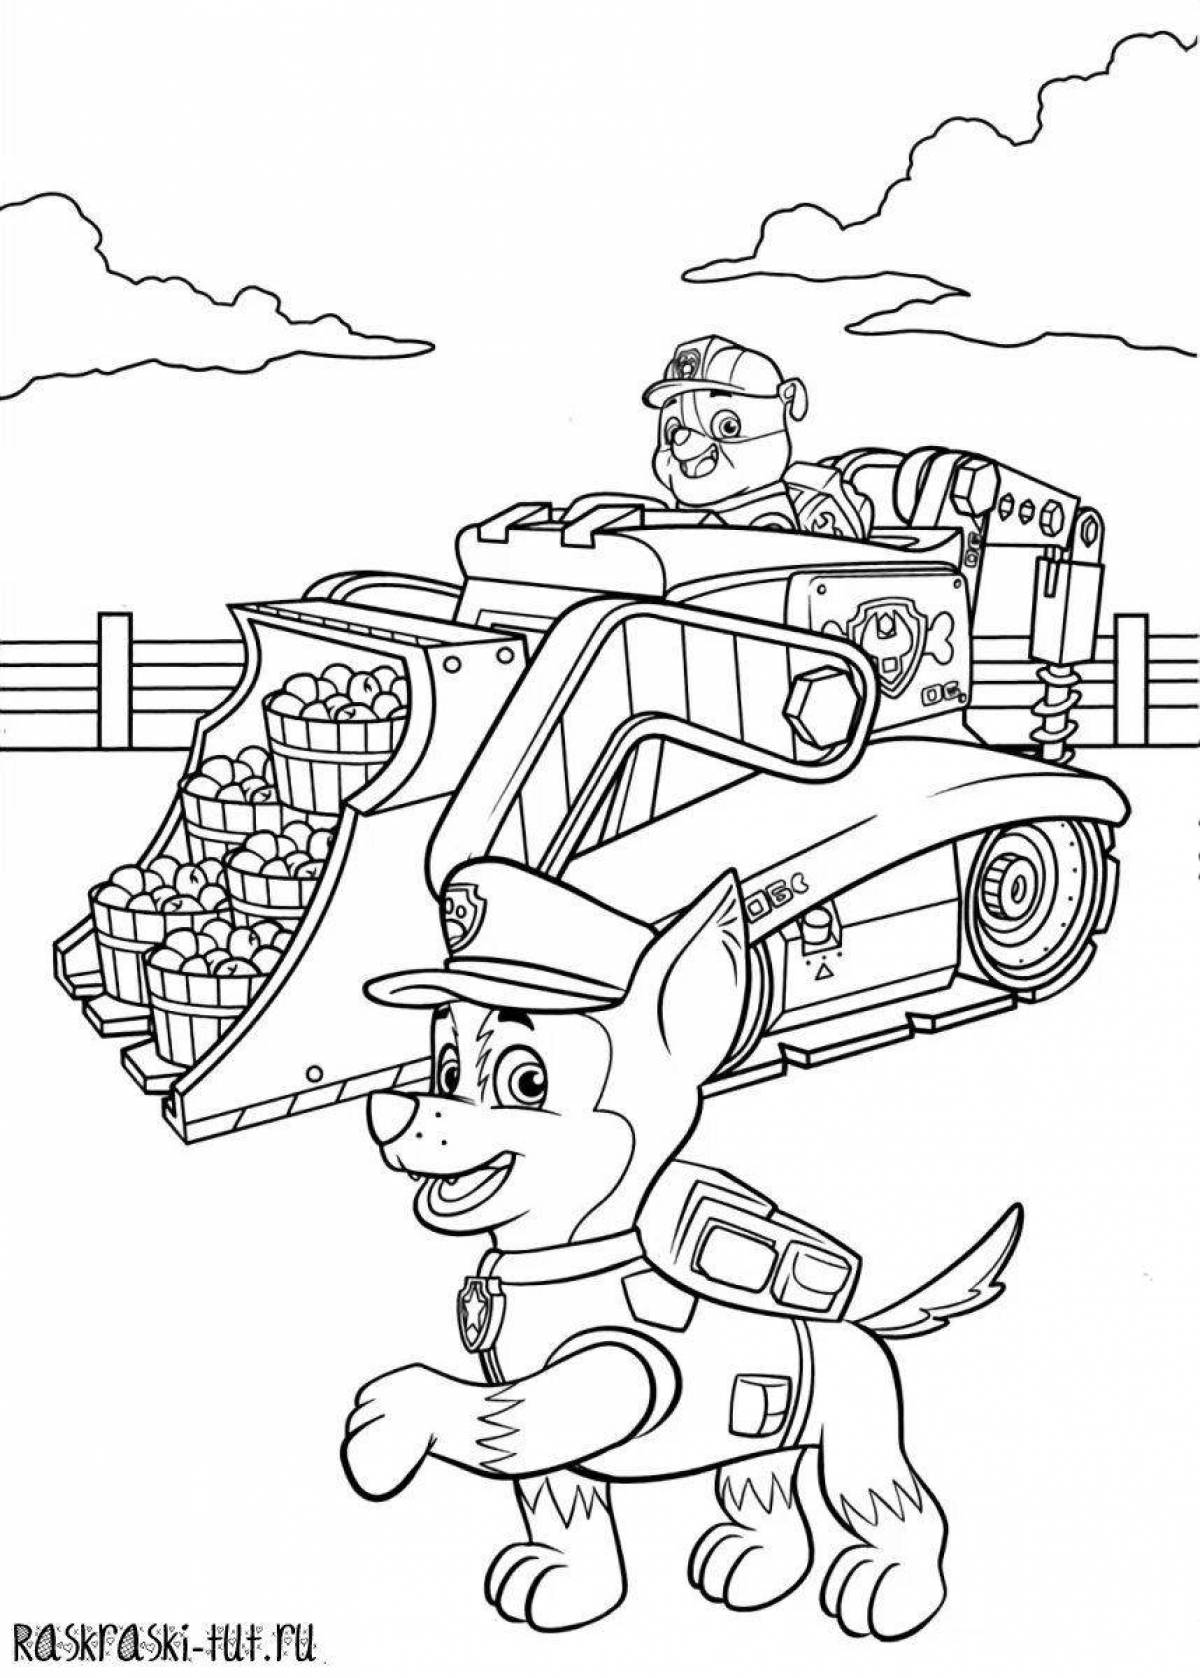 Cute coloring page paw patrol with cars